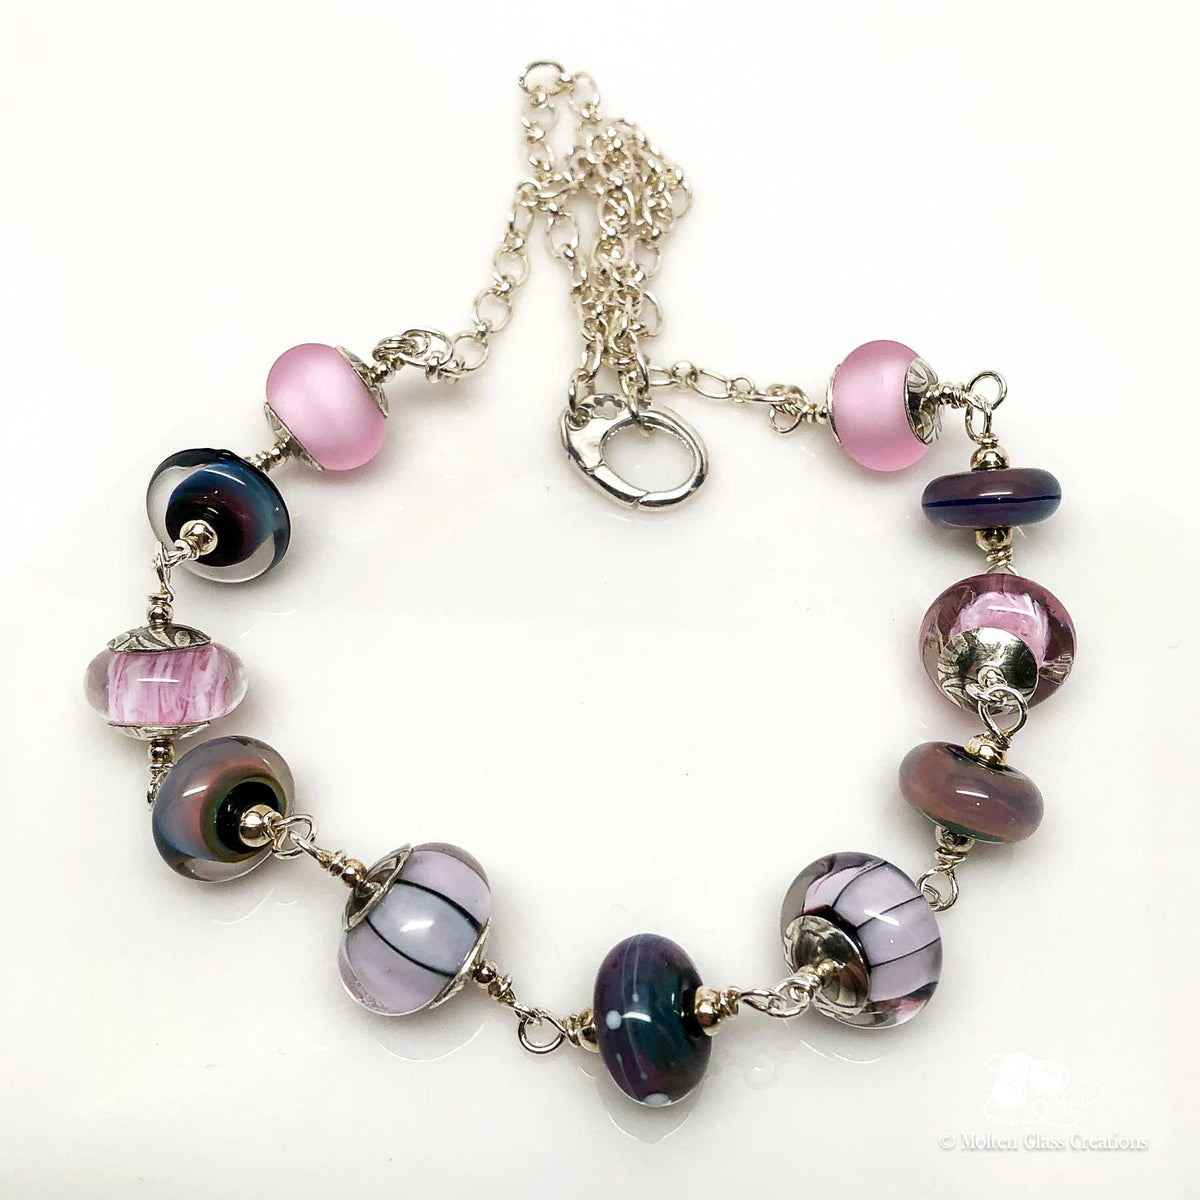 Perfectly Pink and Purple Bead Necklace